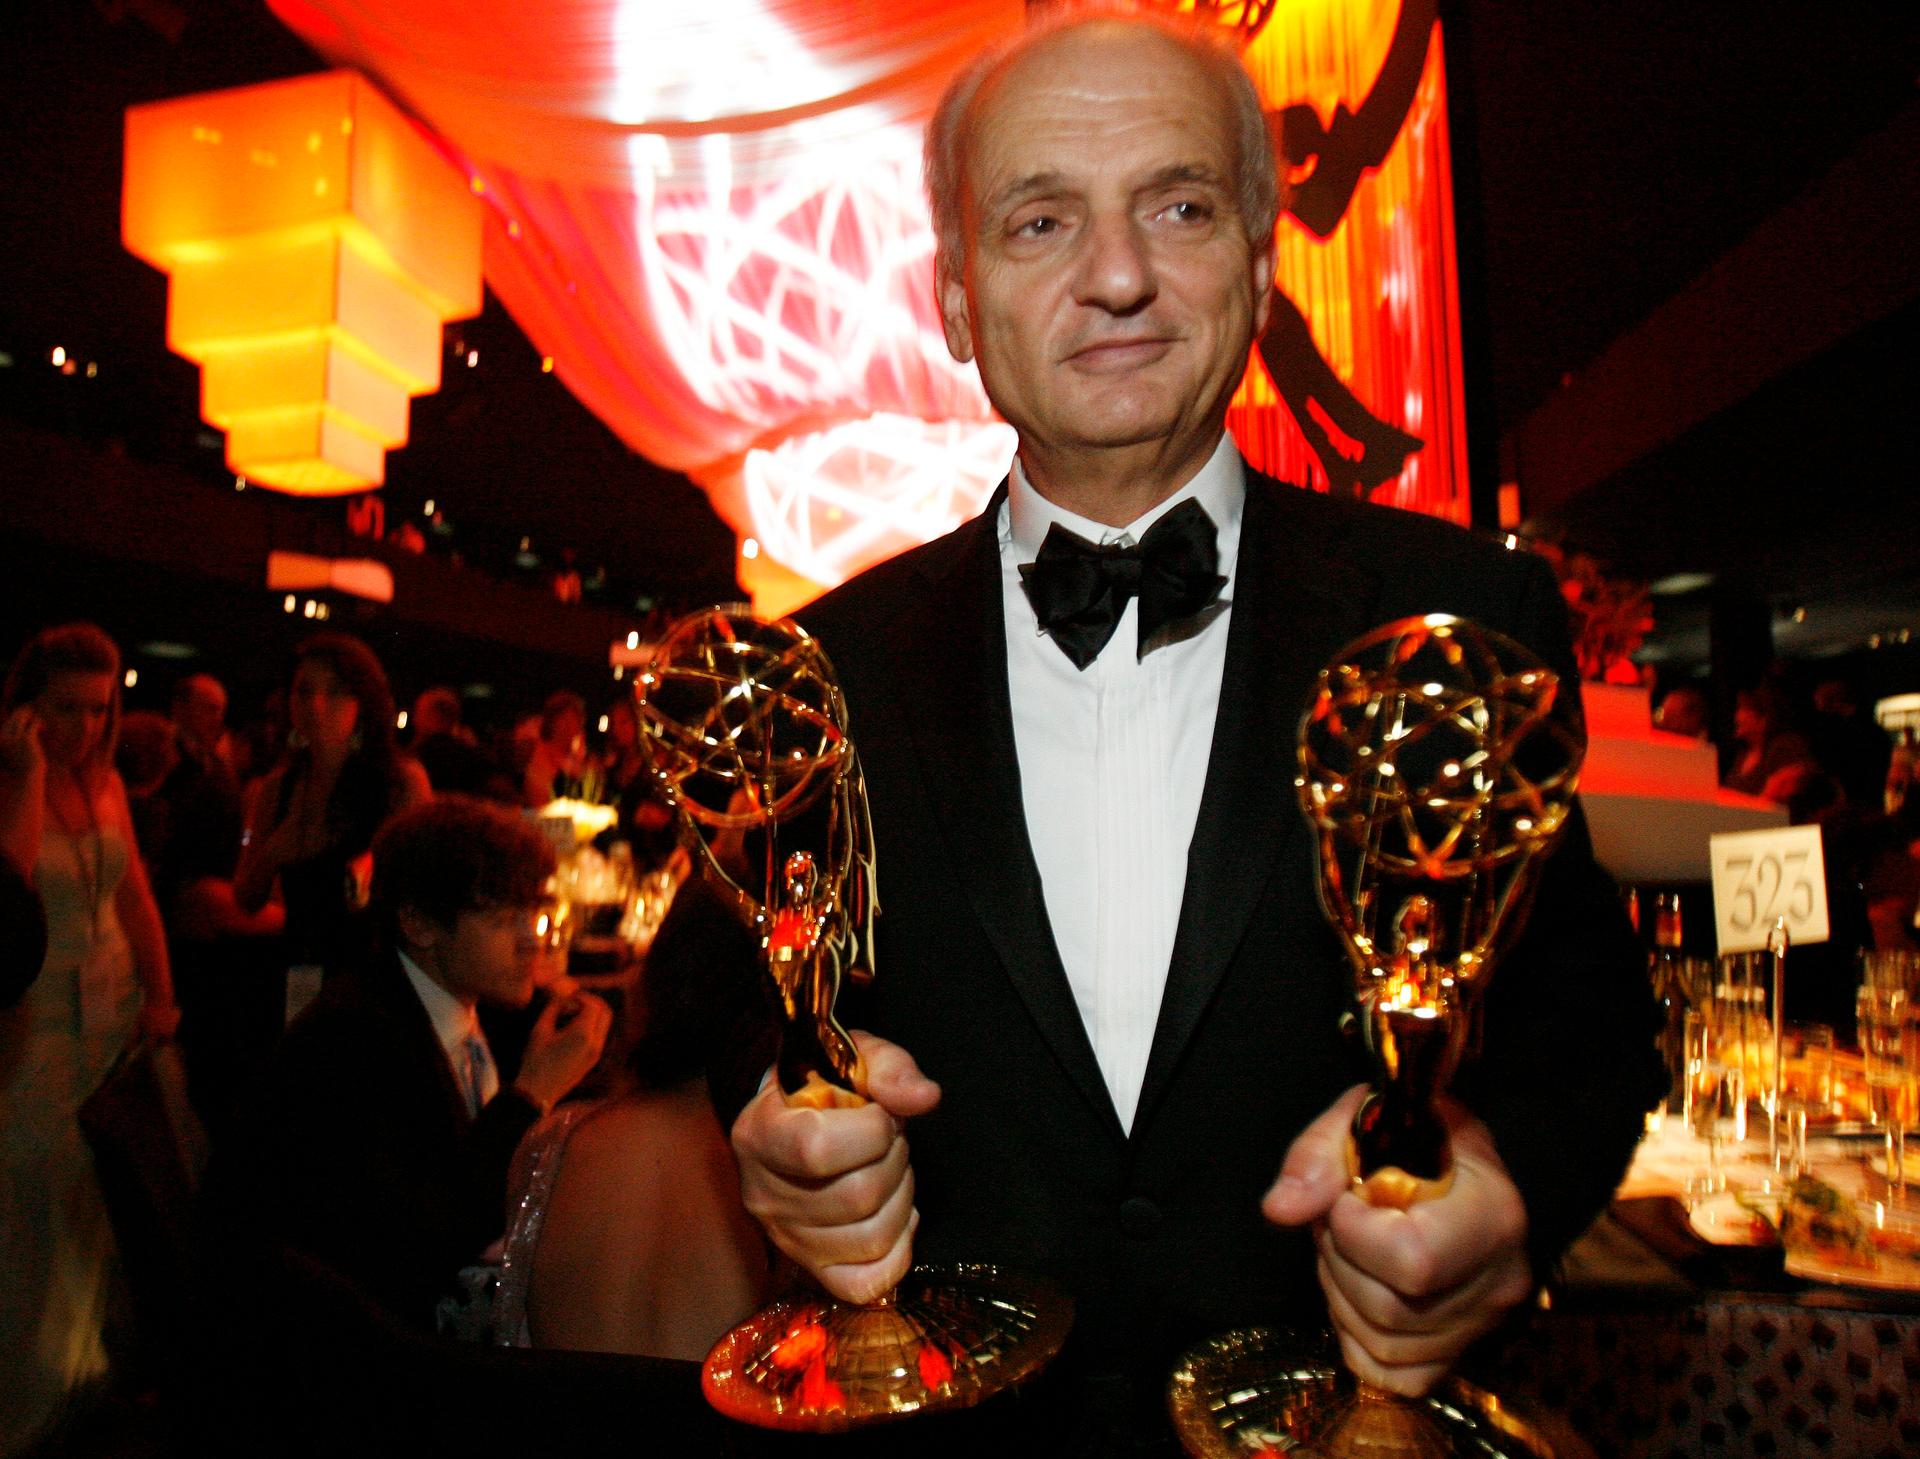 David Chase with his Emmy wins for “The Sopranos” in 2007.